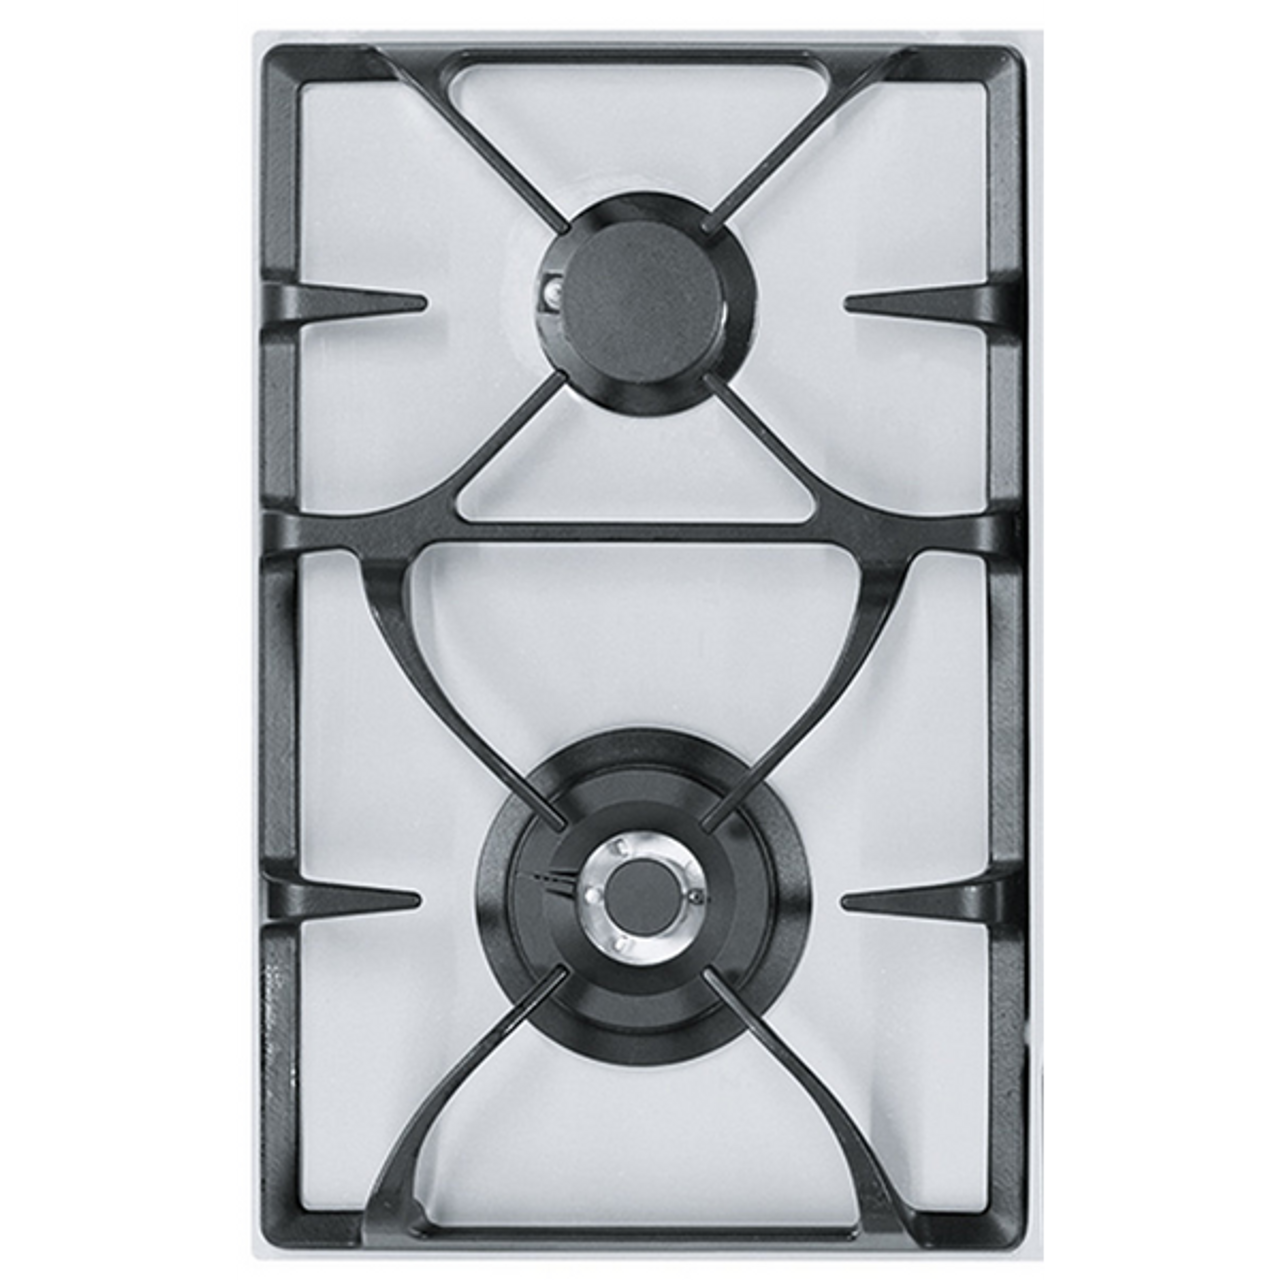 FIG906S1N - 99cm Professional Series Natural Gas Cooktop - Stainless Steel